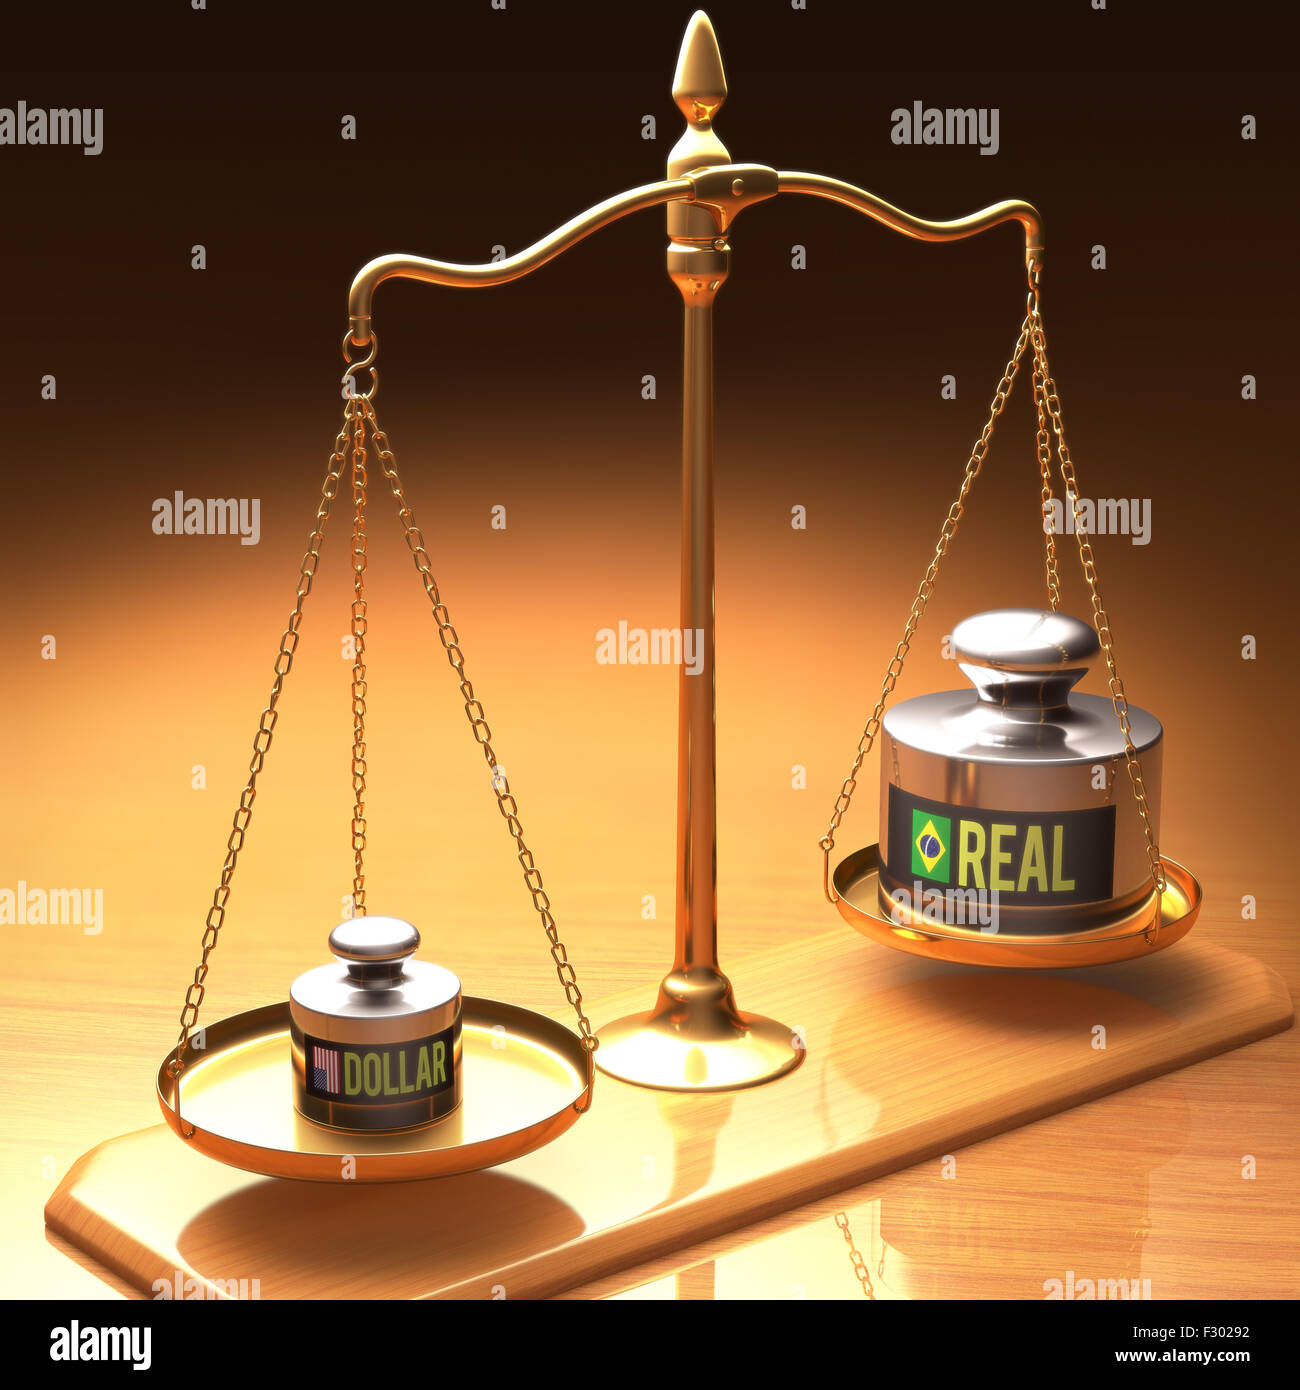 Scales of justice weighing two currencies. Stronger dollar than the real.  Clipping path included Stock Photo - Alamy